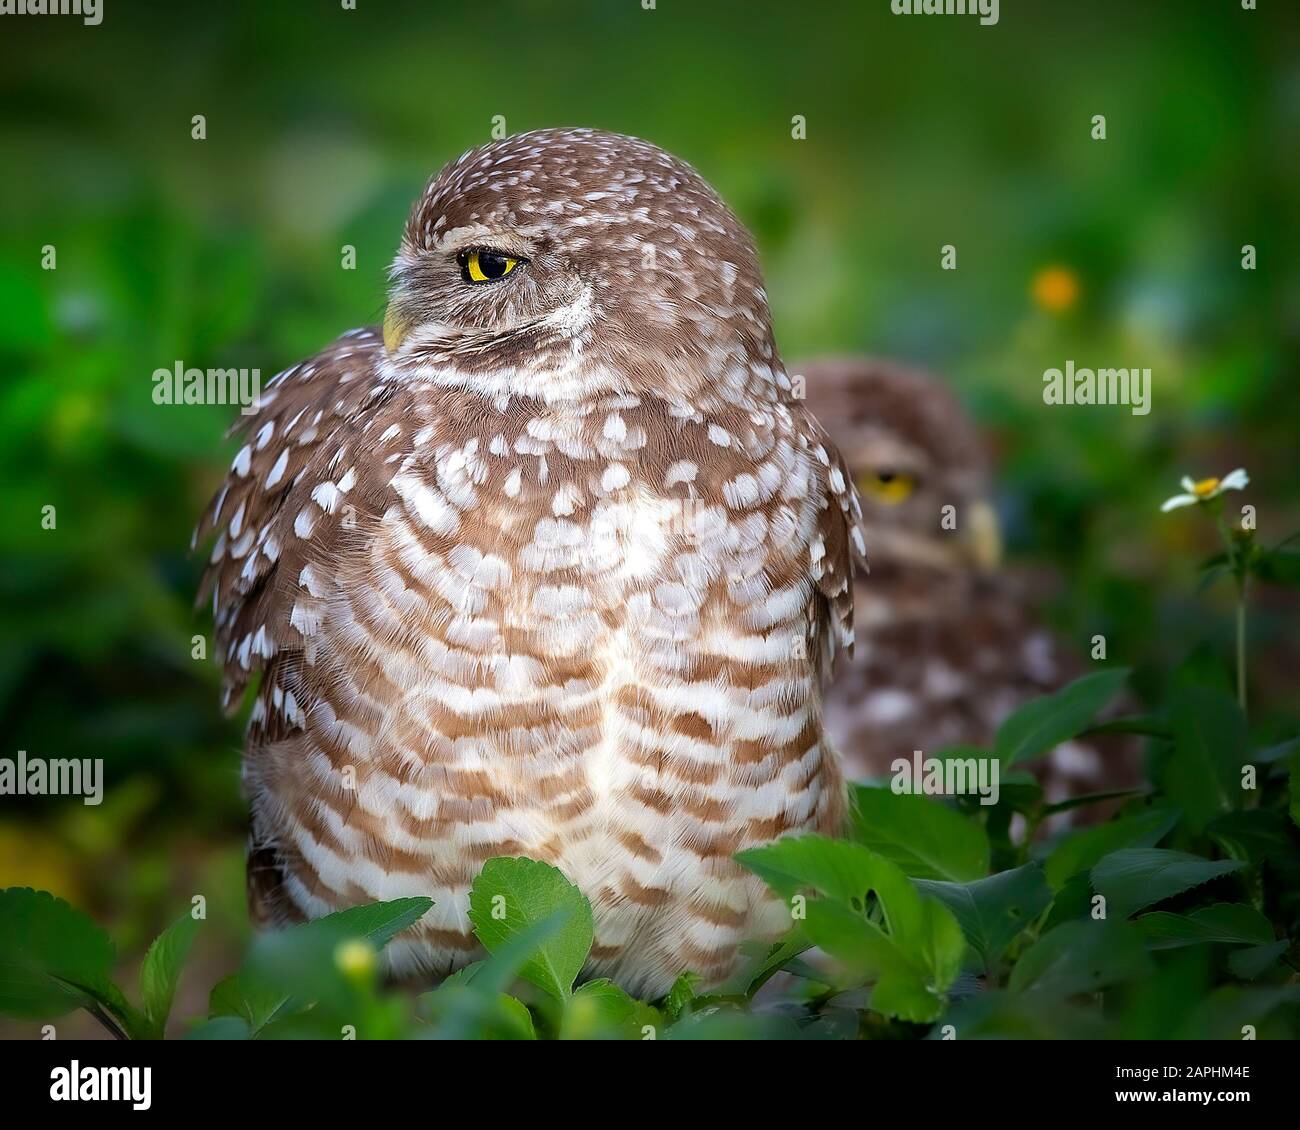 A cute and very alert burrowing owl in South Florida with another one behind it. Stock Photo